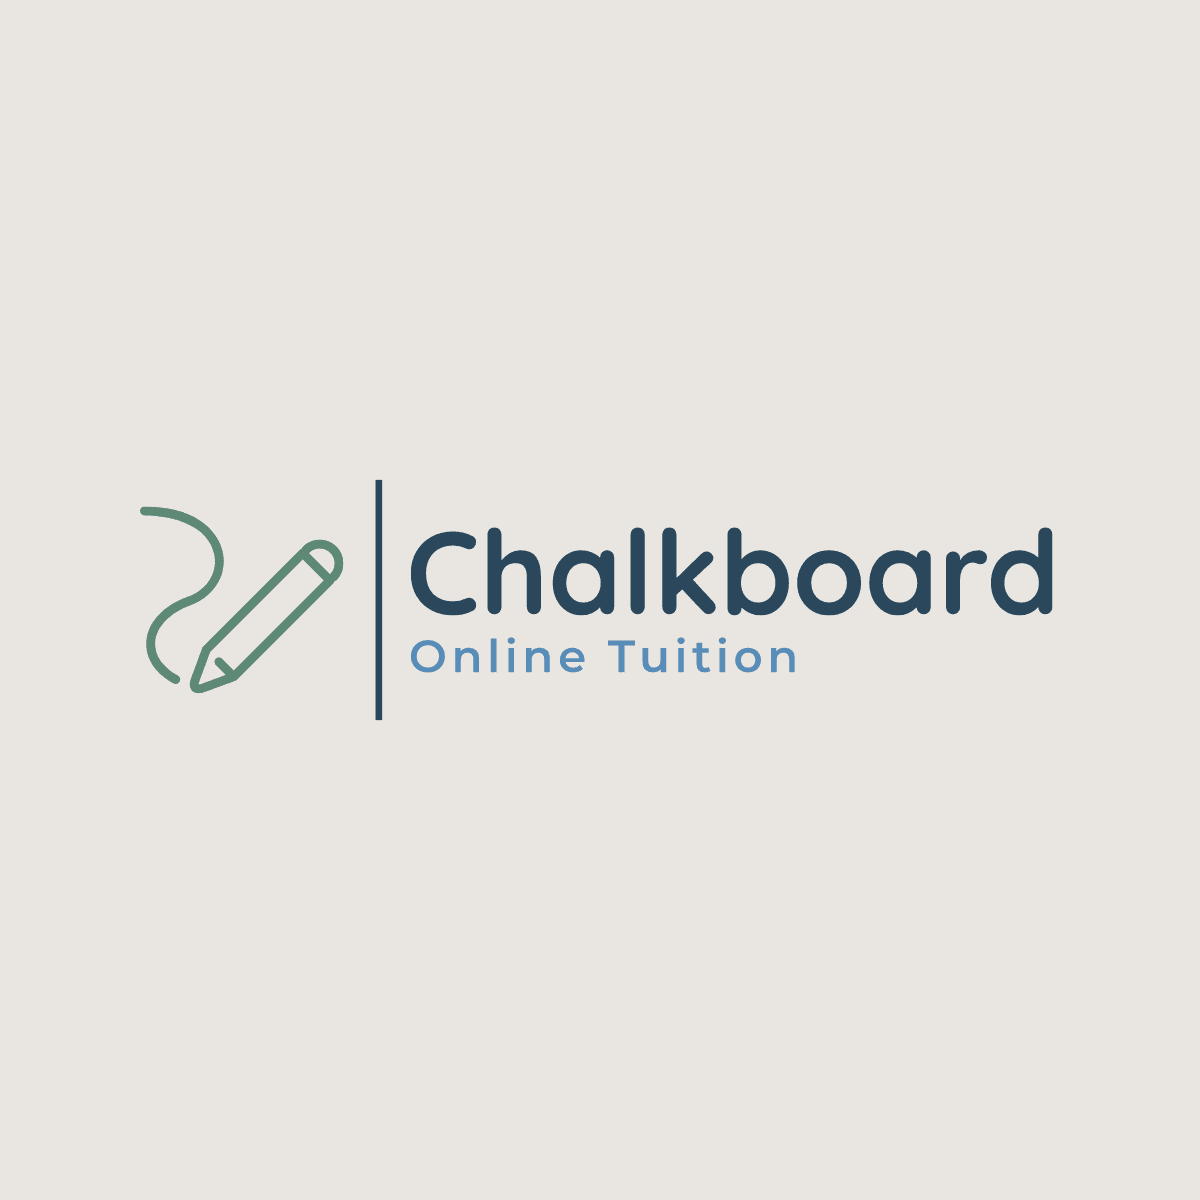 Chalkboard Tuition - Sunderland, Tyne and Wear - 07906 987876 | ShowMeLocal.com